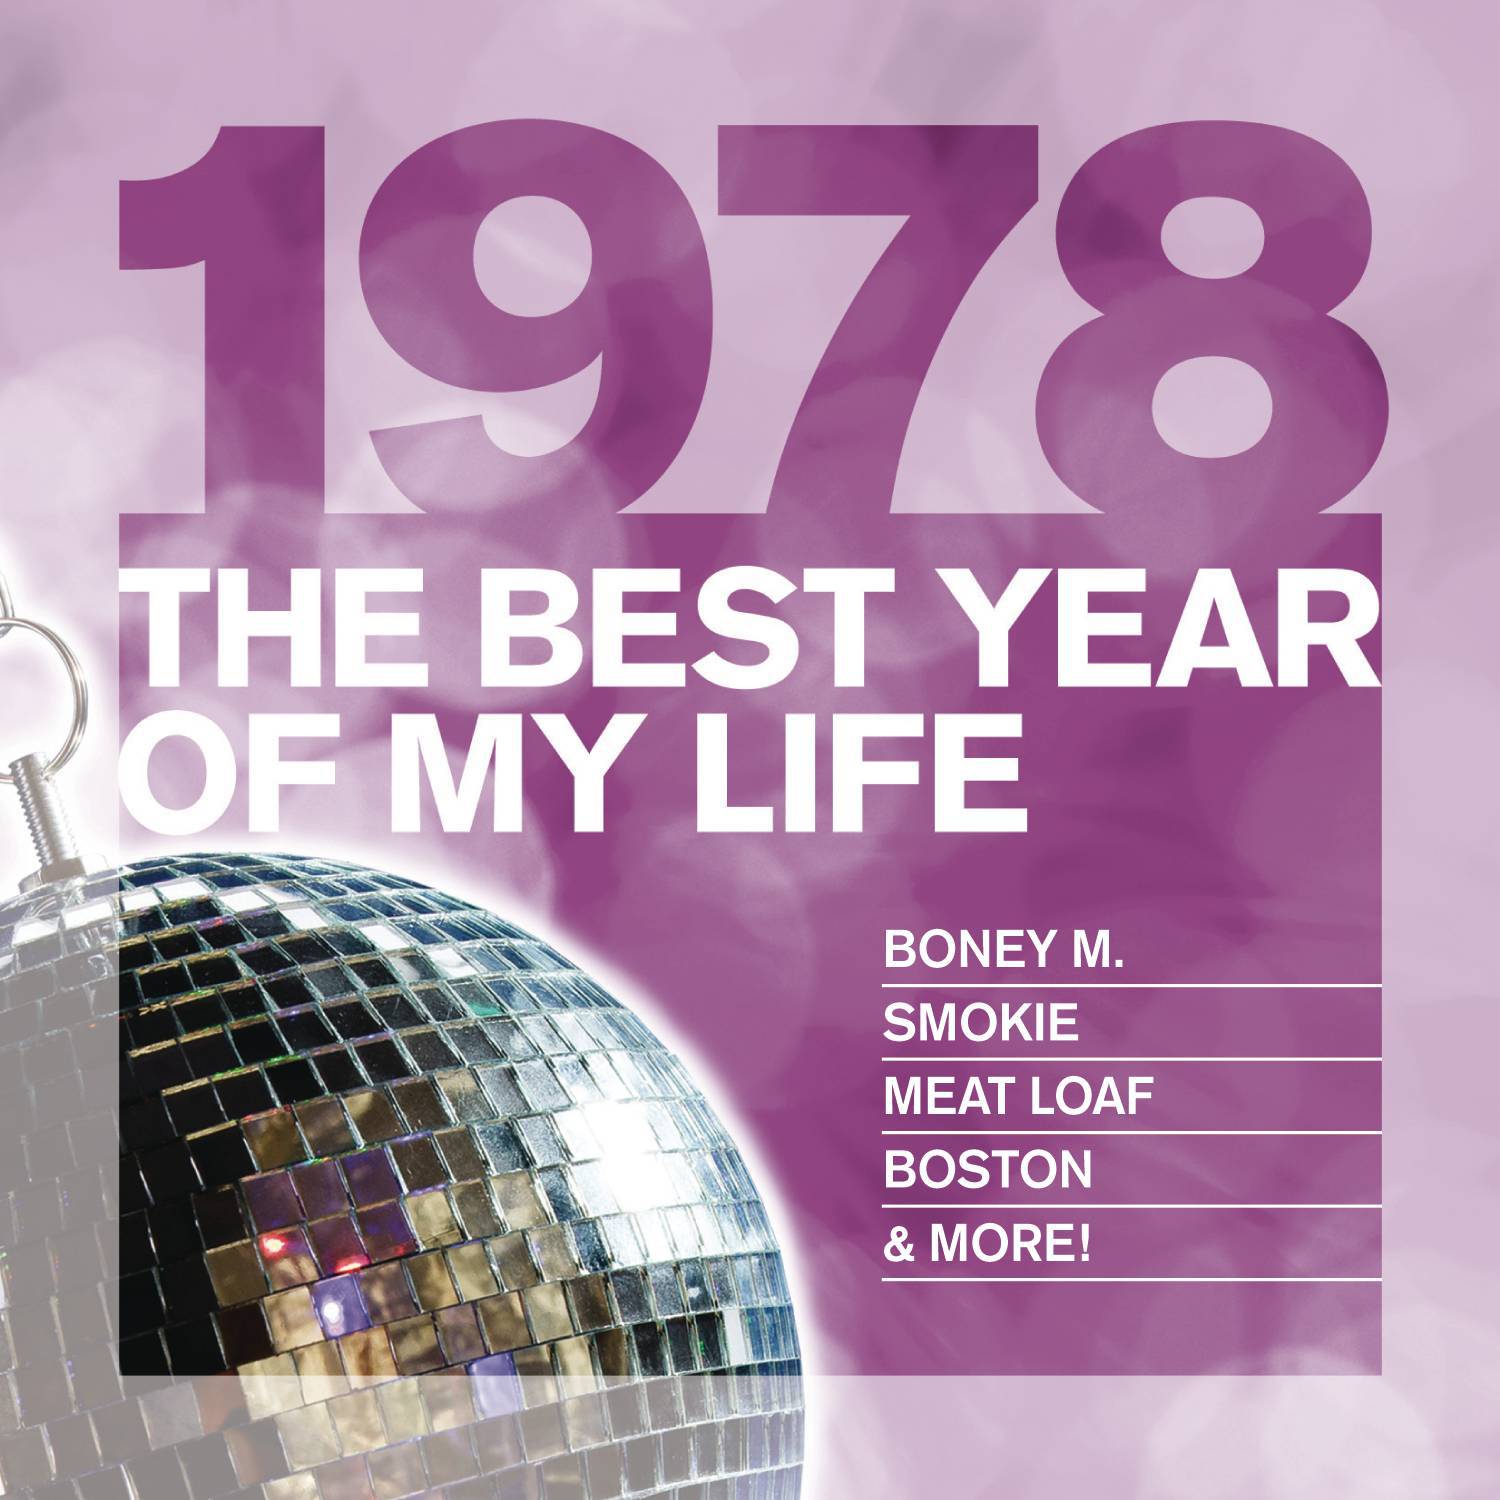 The Best Year Of My Life: 1978